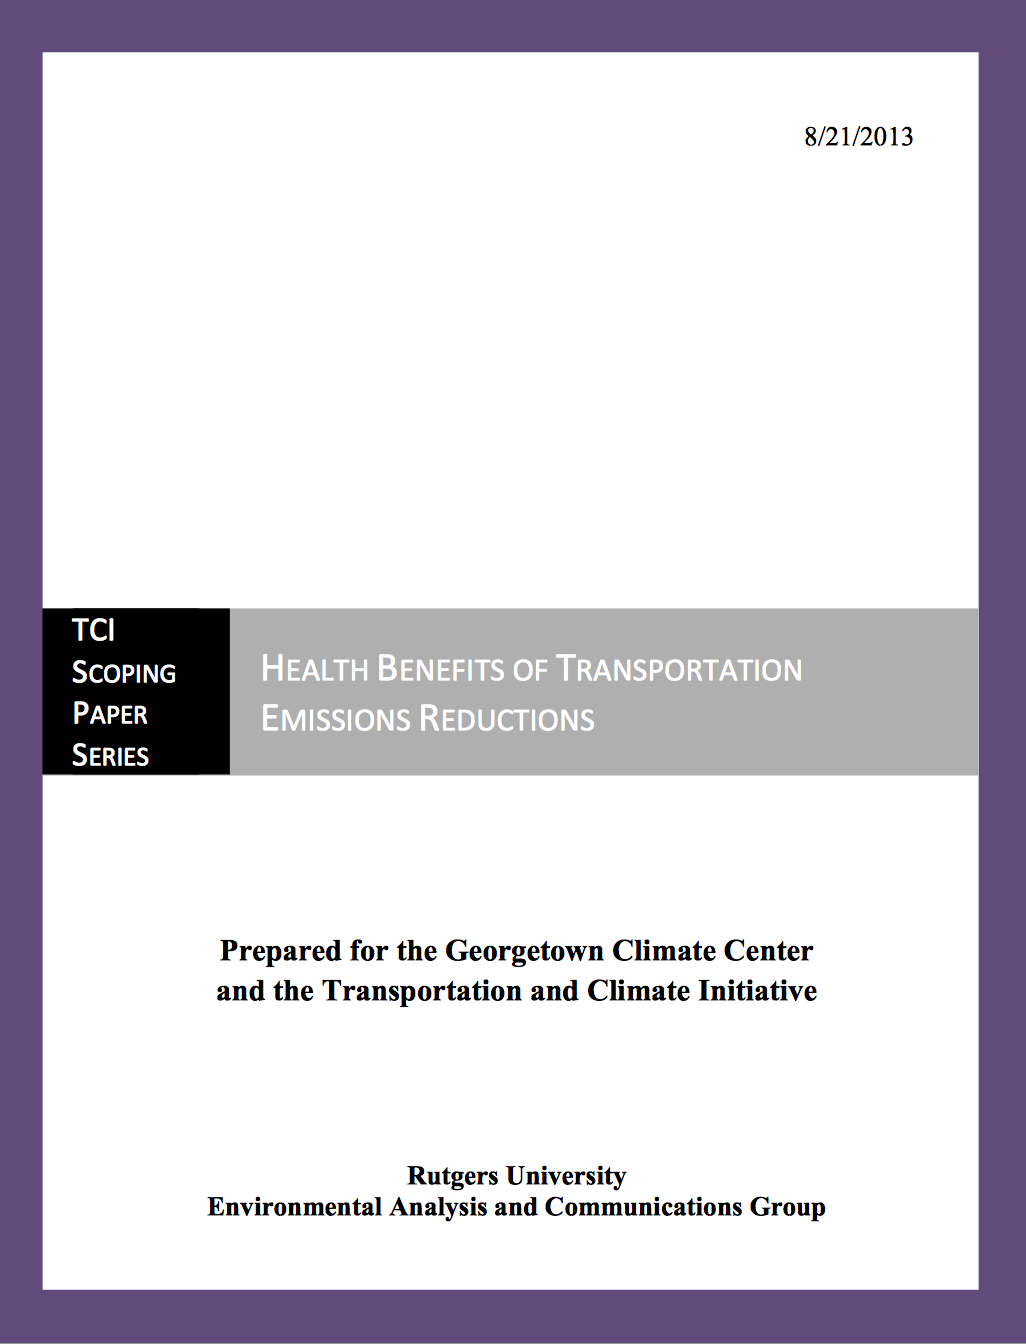 Sustainable Communities Indicators Research Paper Series: Health Benefits of Transportation Emissions Reductions